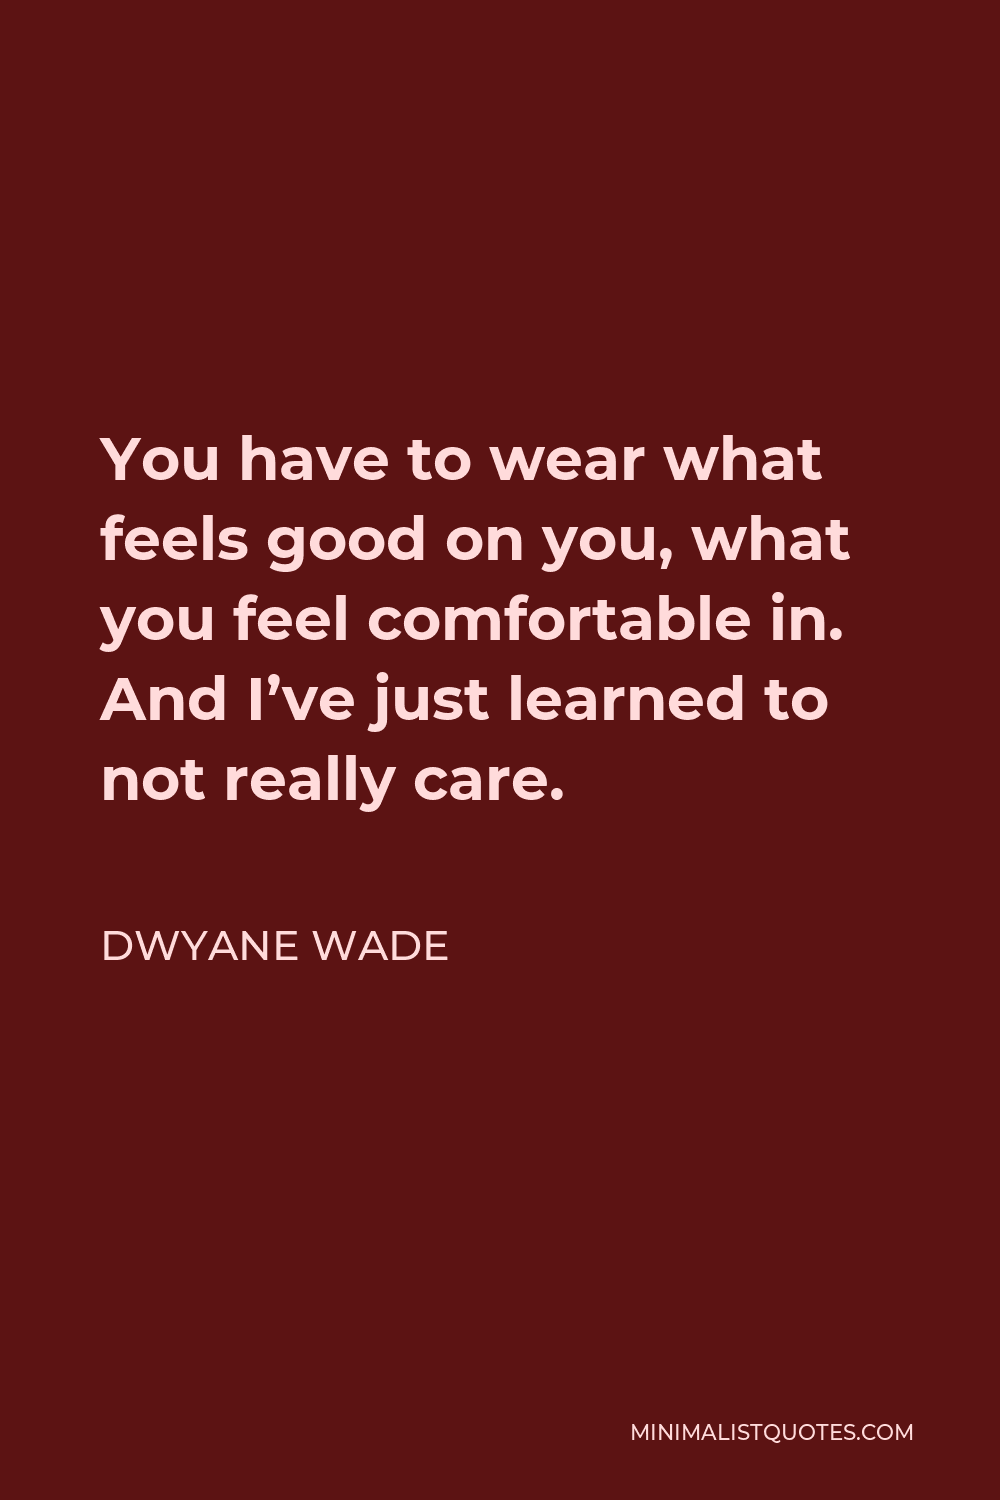 Dwyane Wade Quote - You have to wear what feels good on you, what you feel comfortable in. And I’ve just learned to not really care.